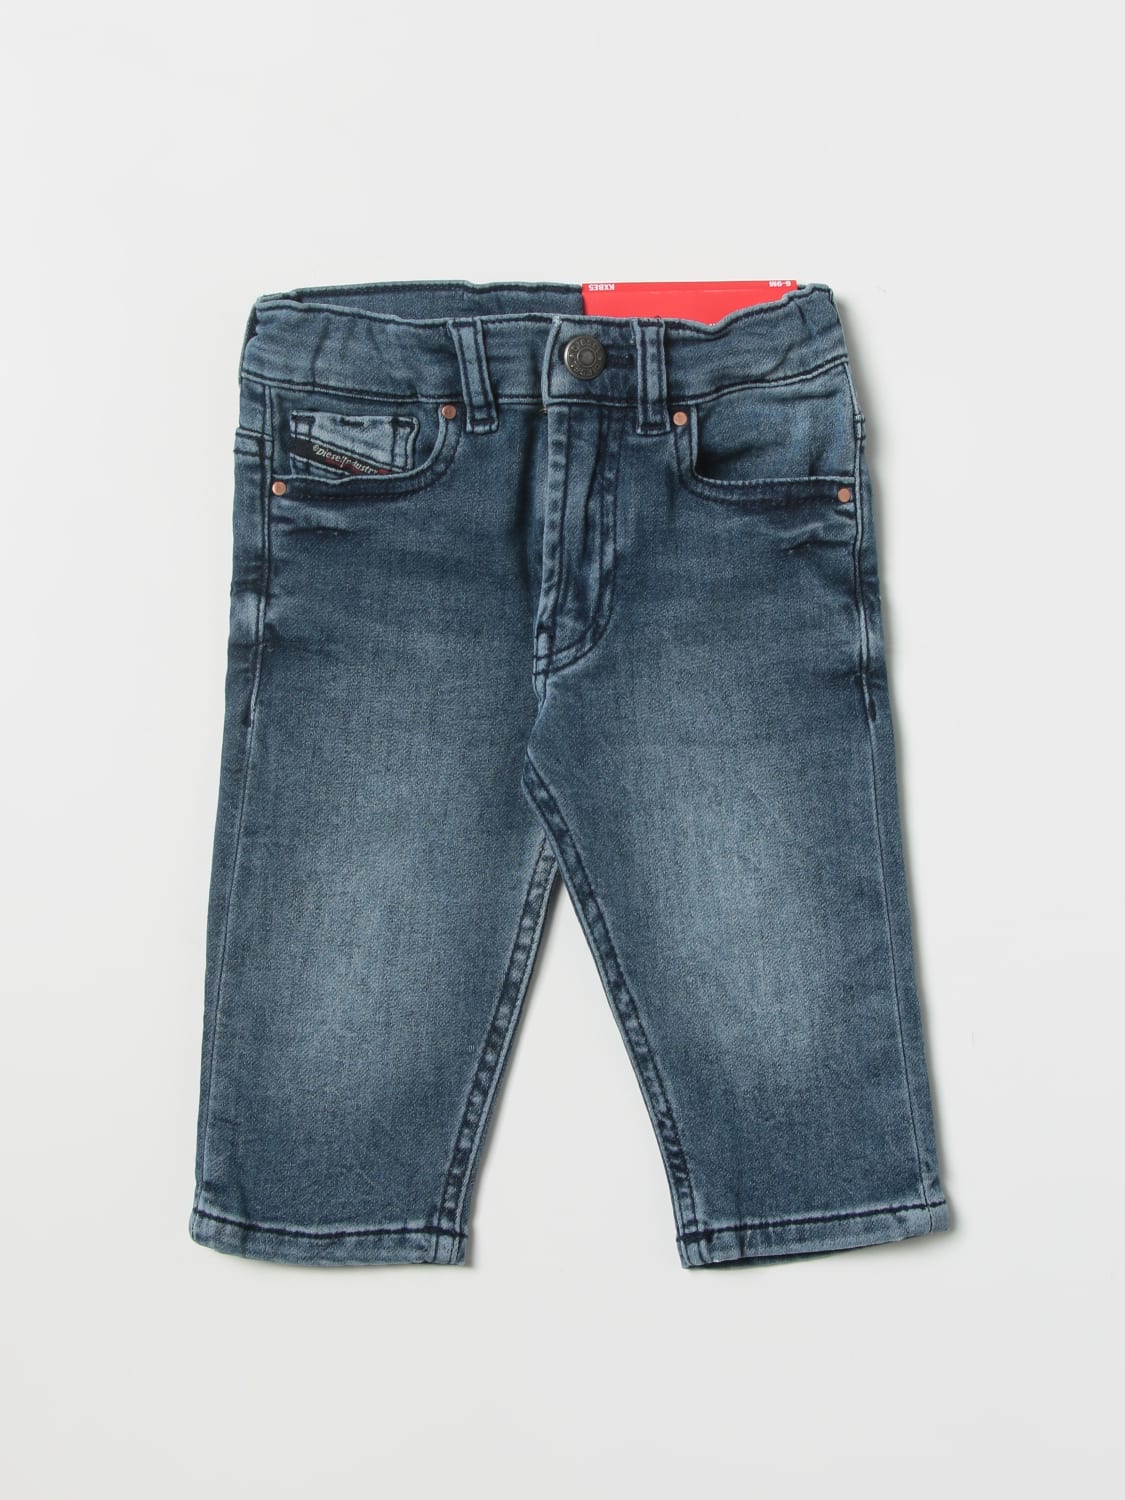 Diesel Outlet: jeans for - | Diesel jeans K00312KXBE5 on GIGLIO.COM